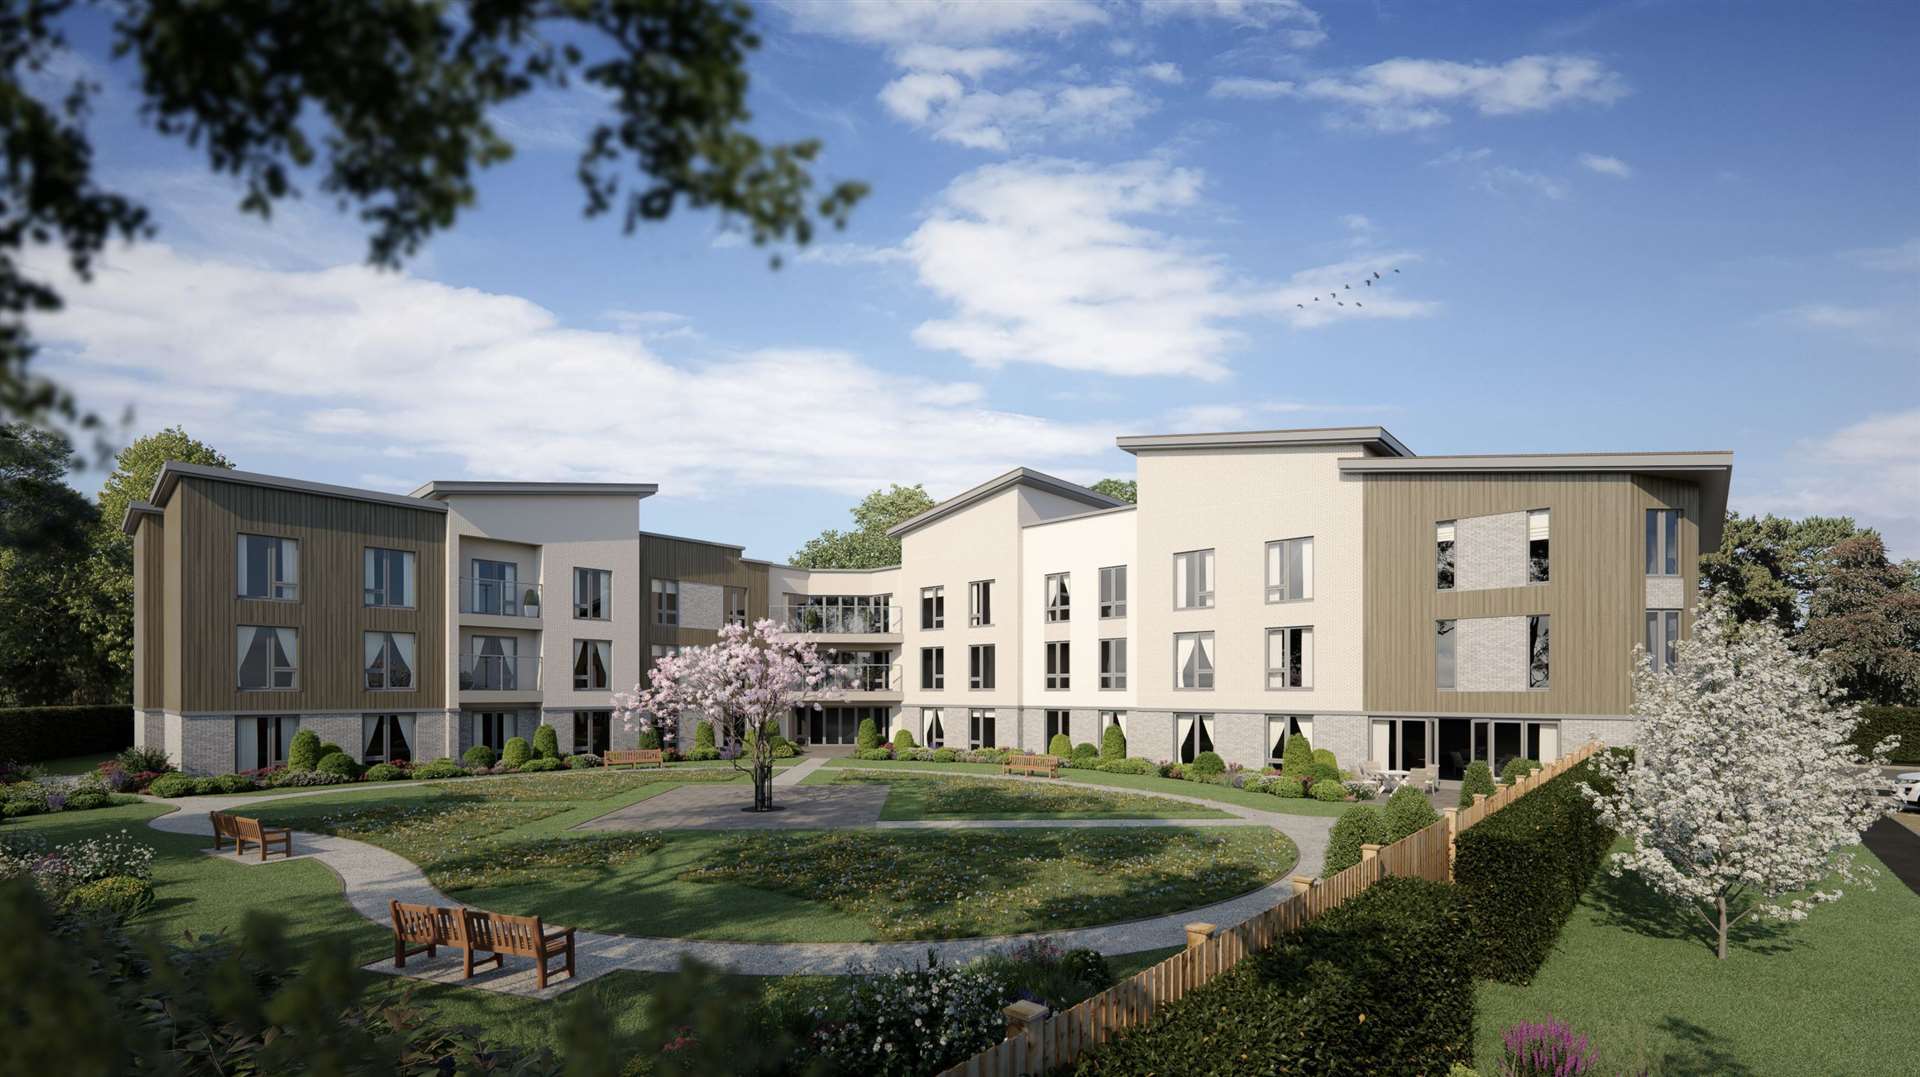 An artist’s impression of how a 75-bed care home in Whitstable could look if approved by Canterbury City Council Pic: DHA Planning